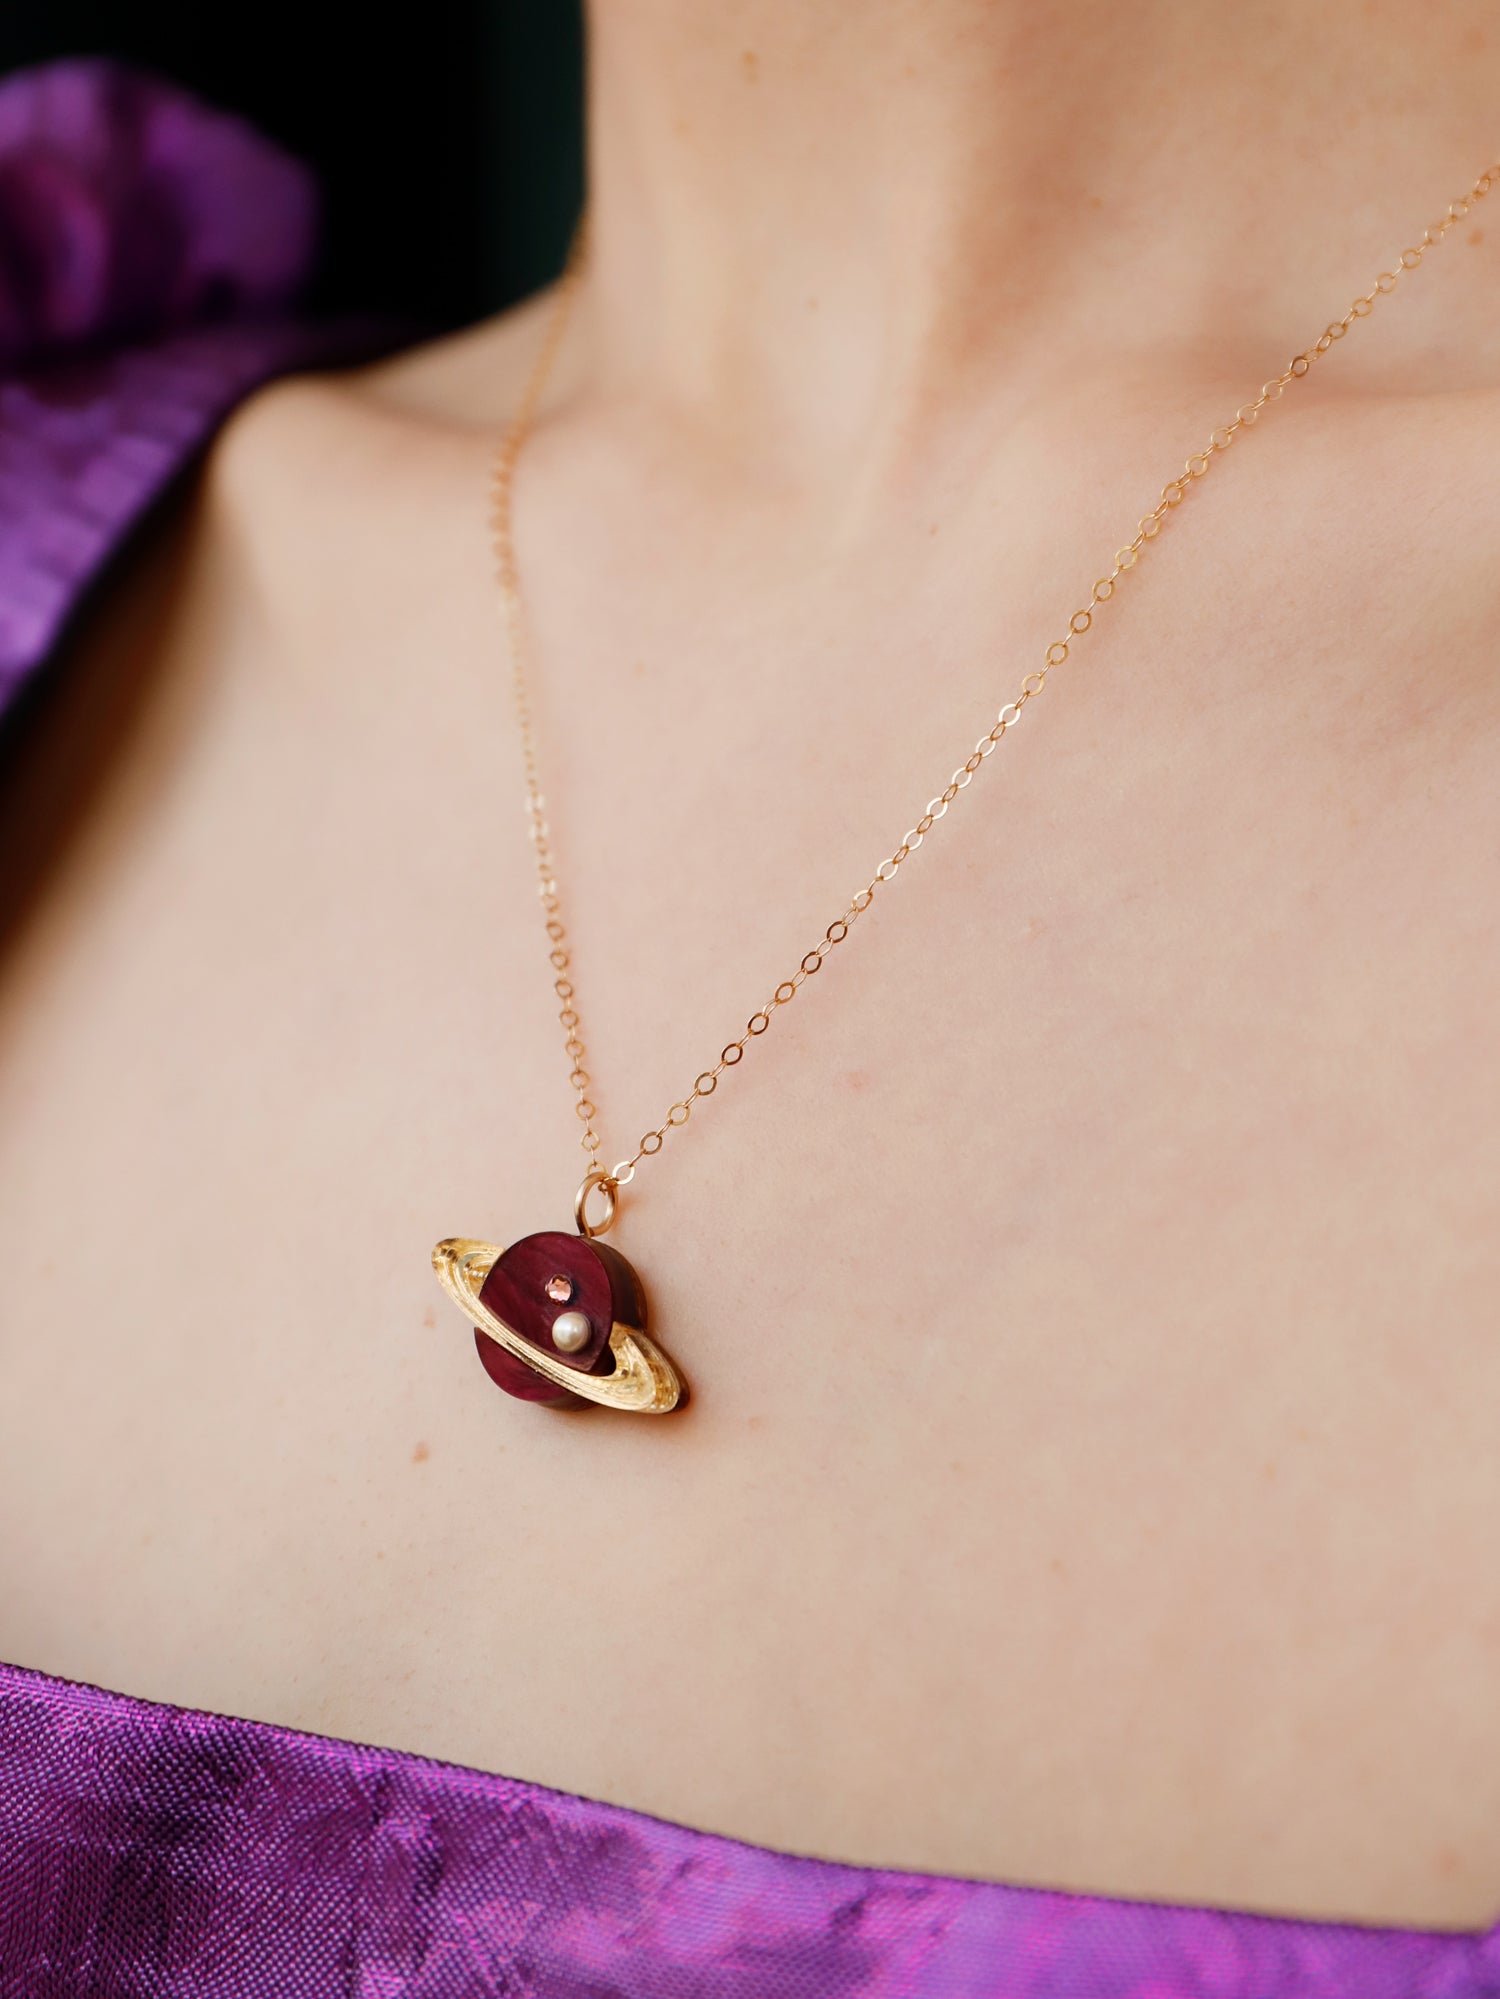 Saturn pendant necklace in pearlescent cherry acrylic, embellished with high quality glass pearls & crystals. Wear with our 14k gold-filled chain. Handmade in London by Wolf & Moon.